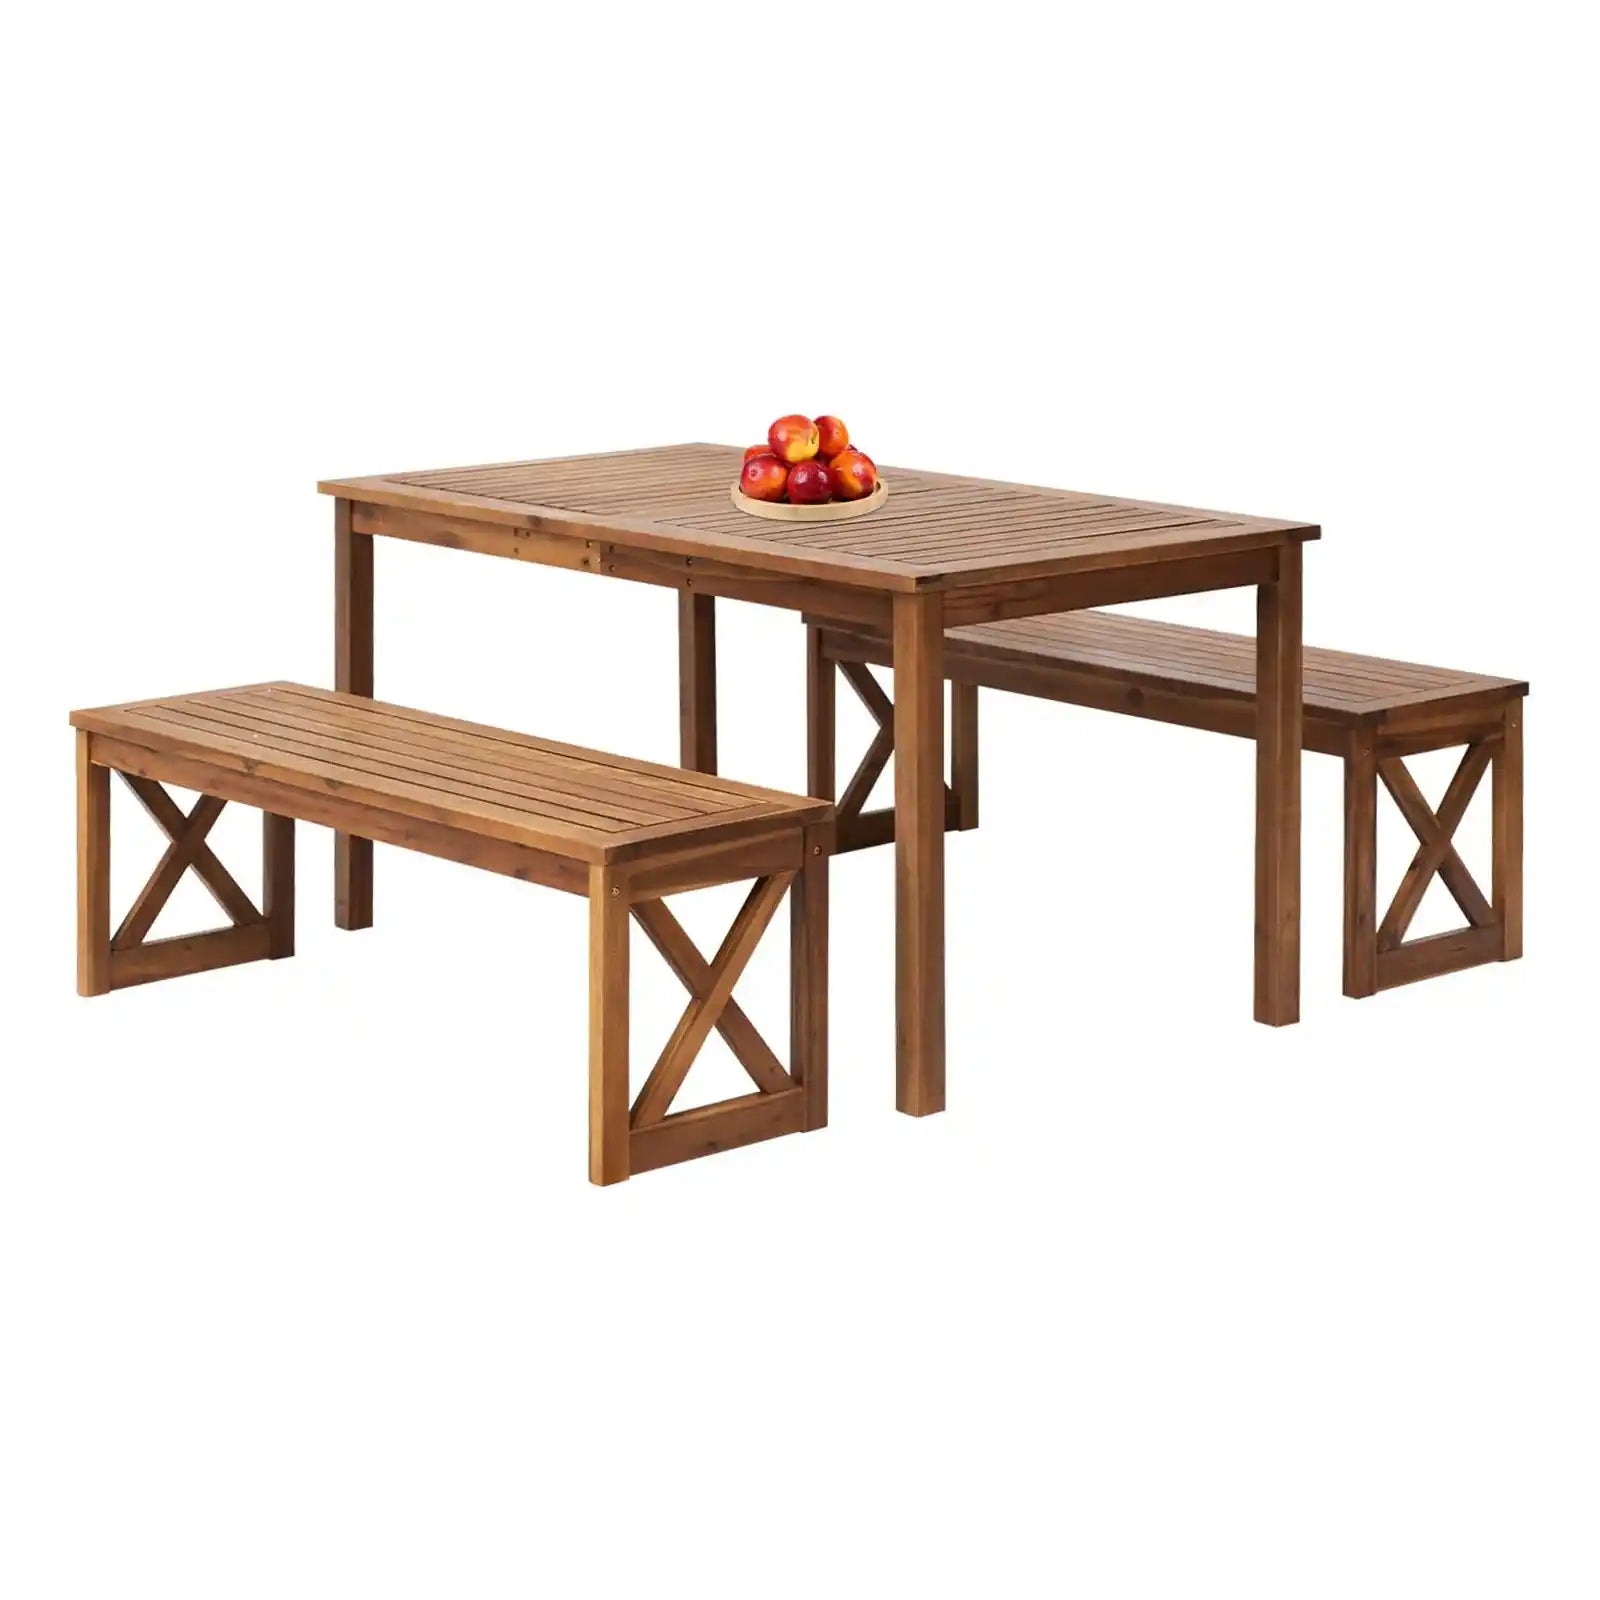 3 Piece Acacia Wood Outdoor Dining Table and Bench Set Patio Bench